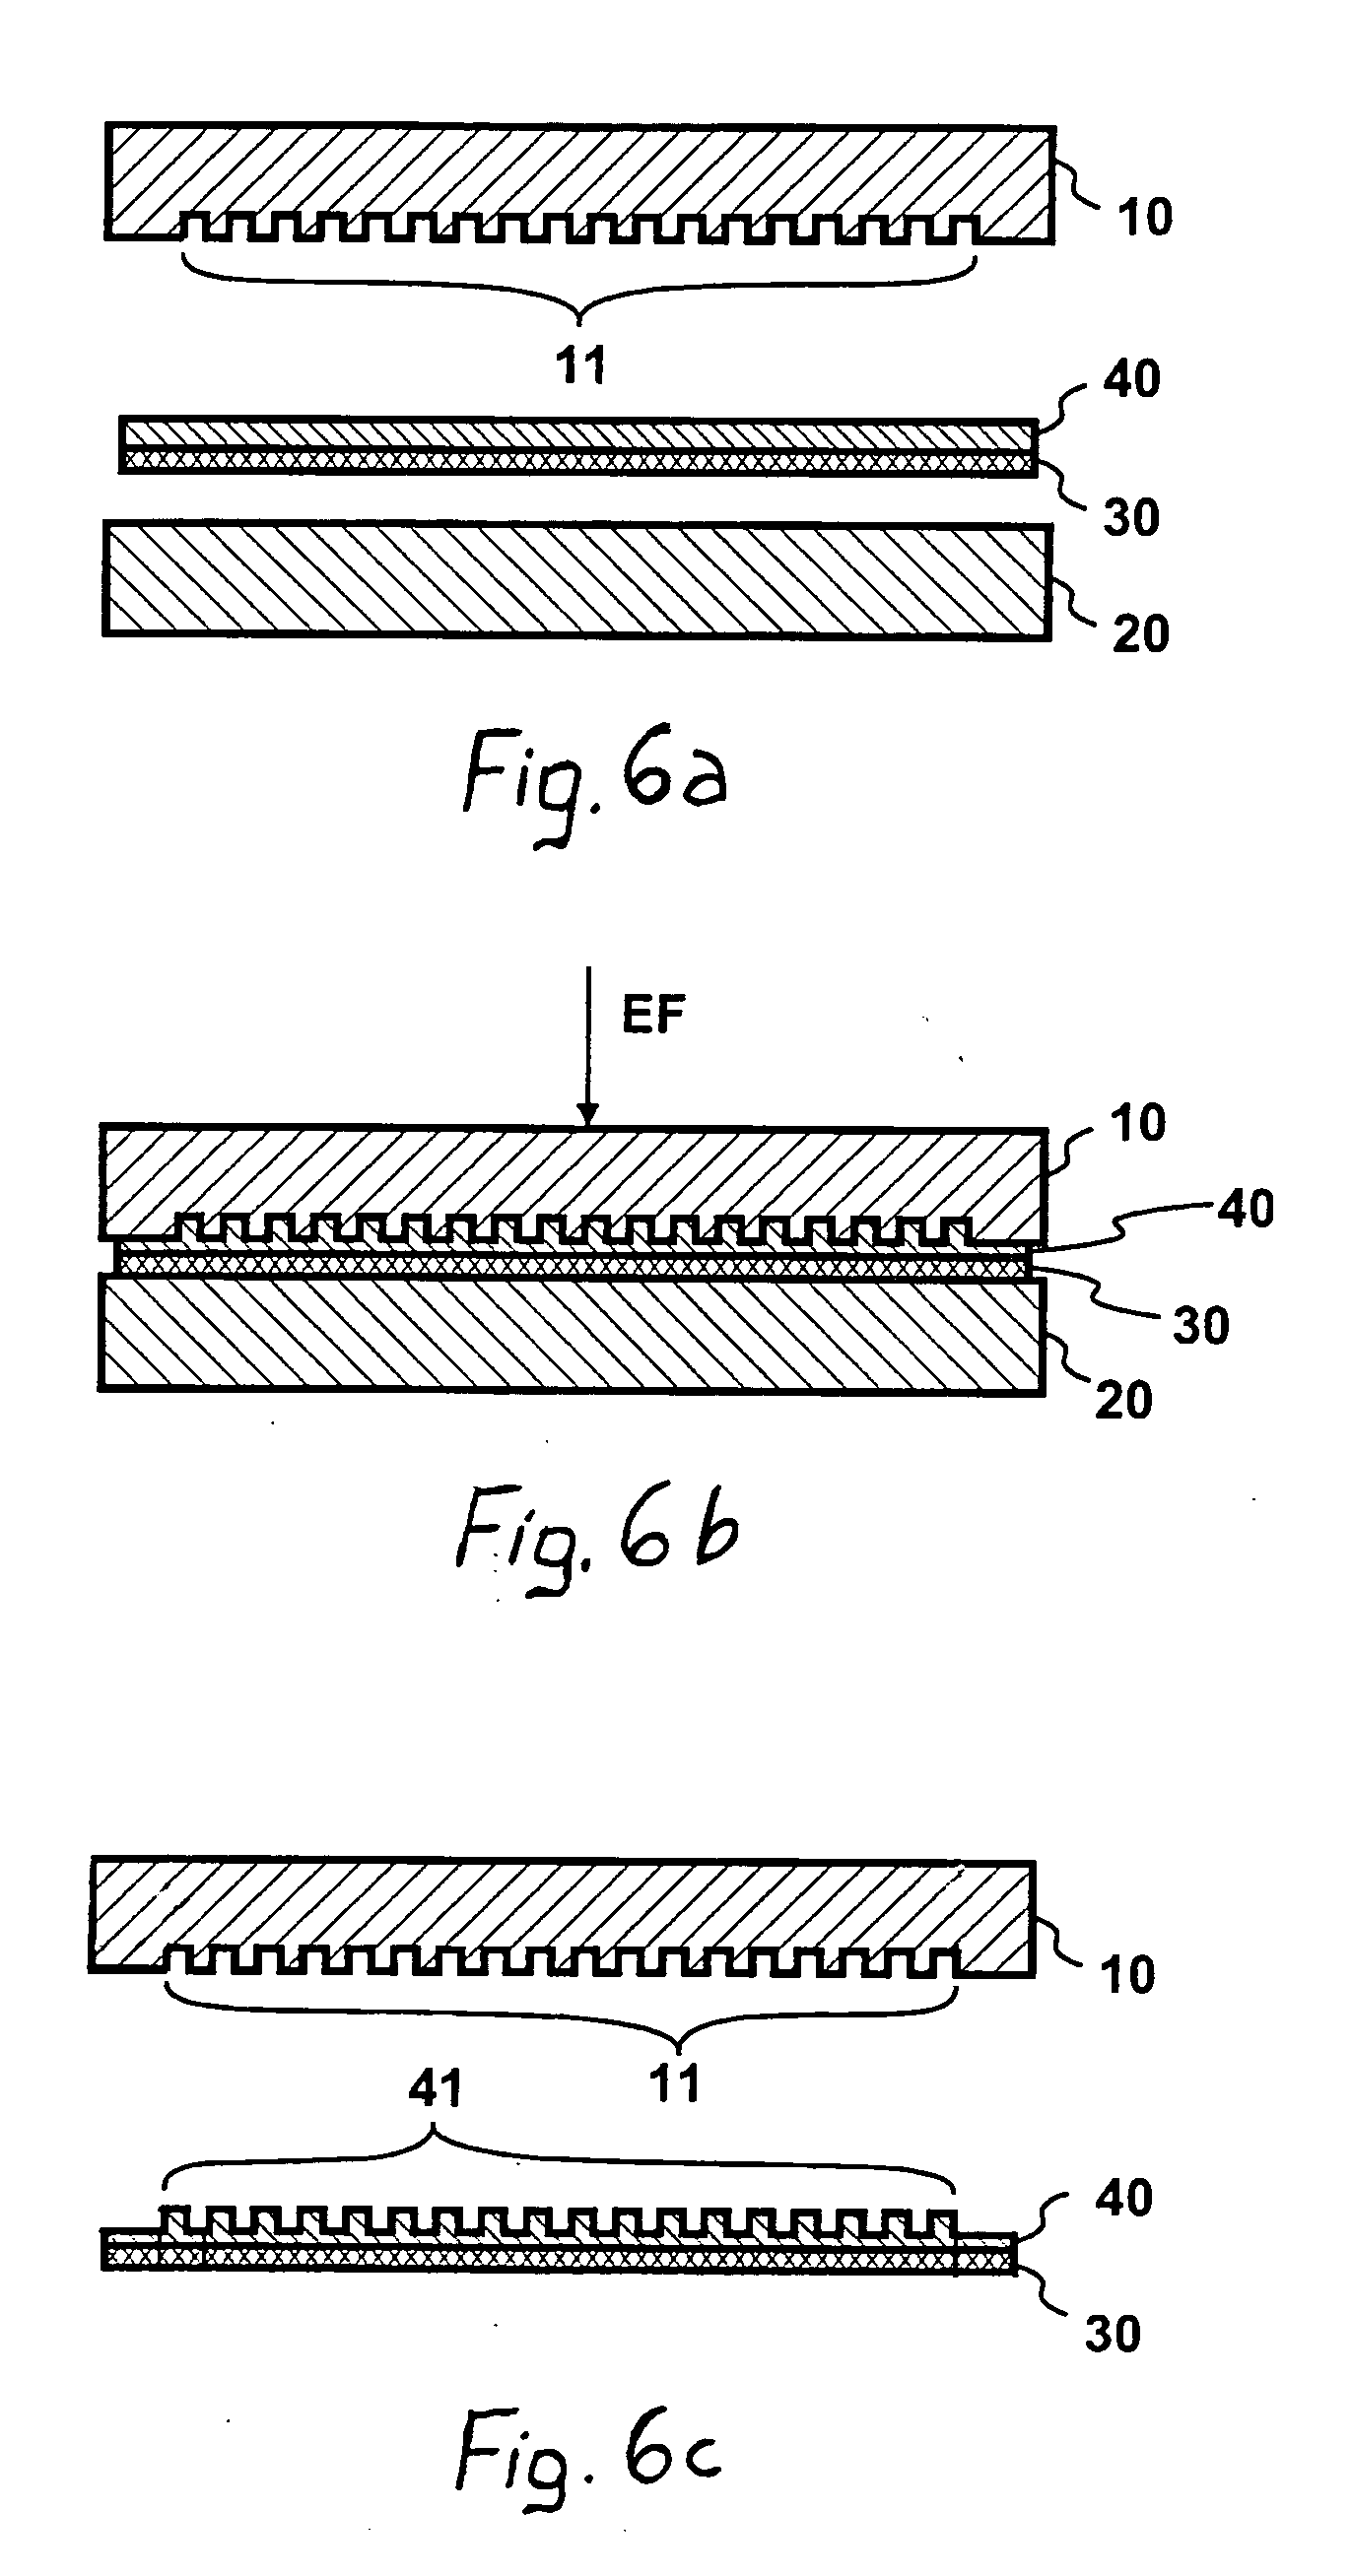 Method, system and package for specifying products to be sold